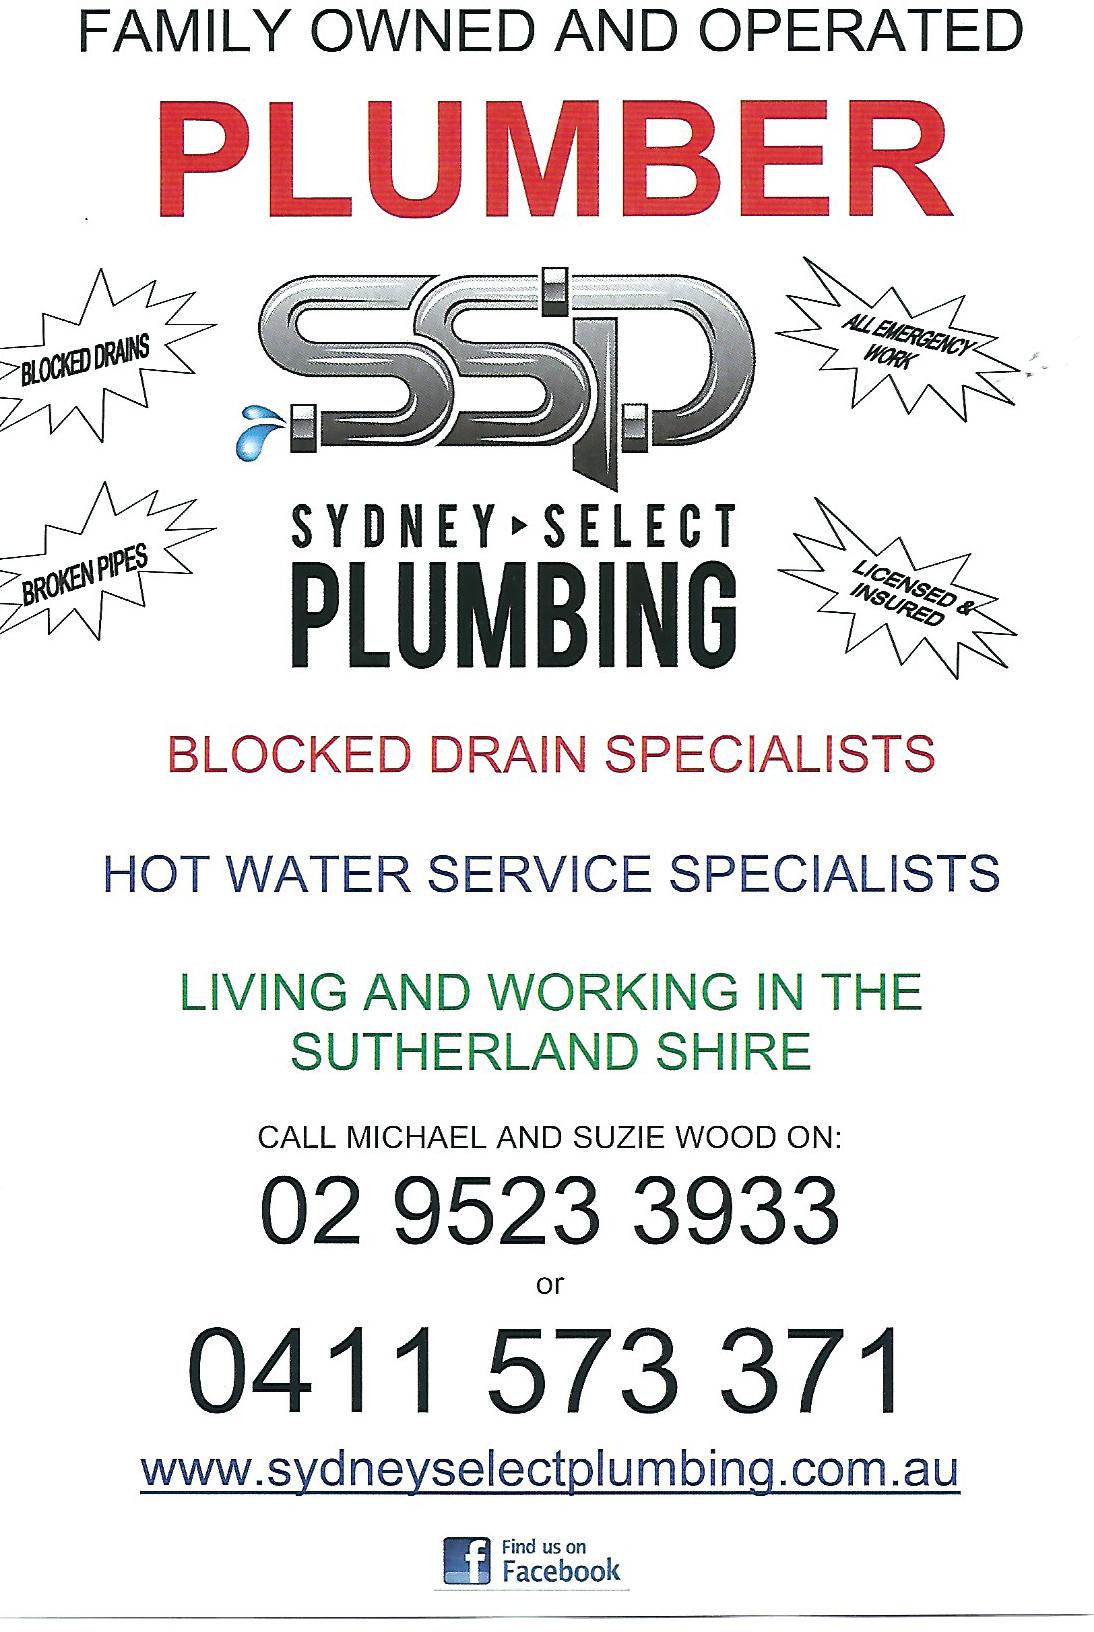 Example Mailbox drop from a Sutherland Shire Plumber